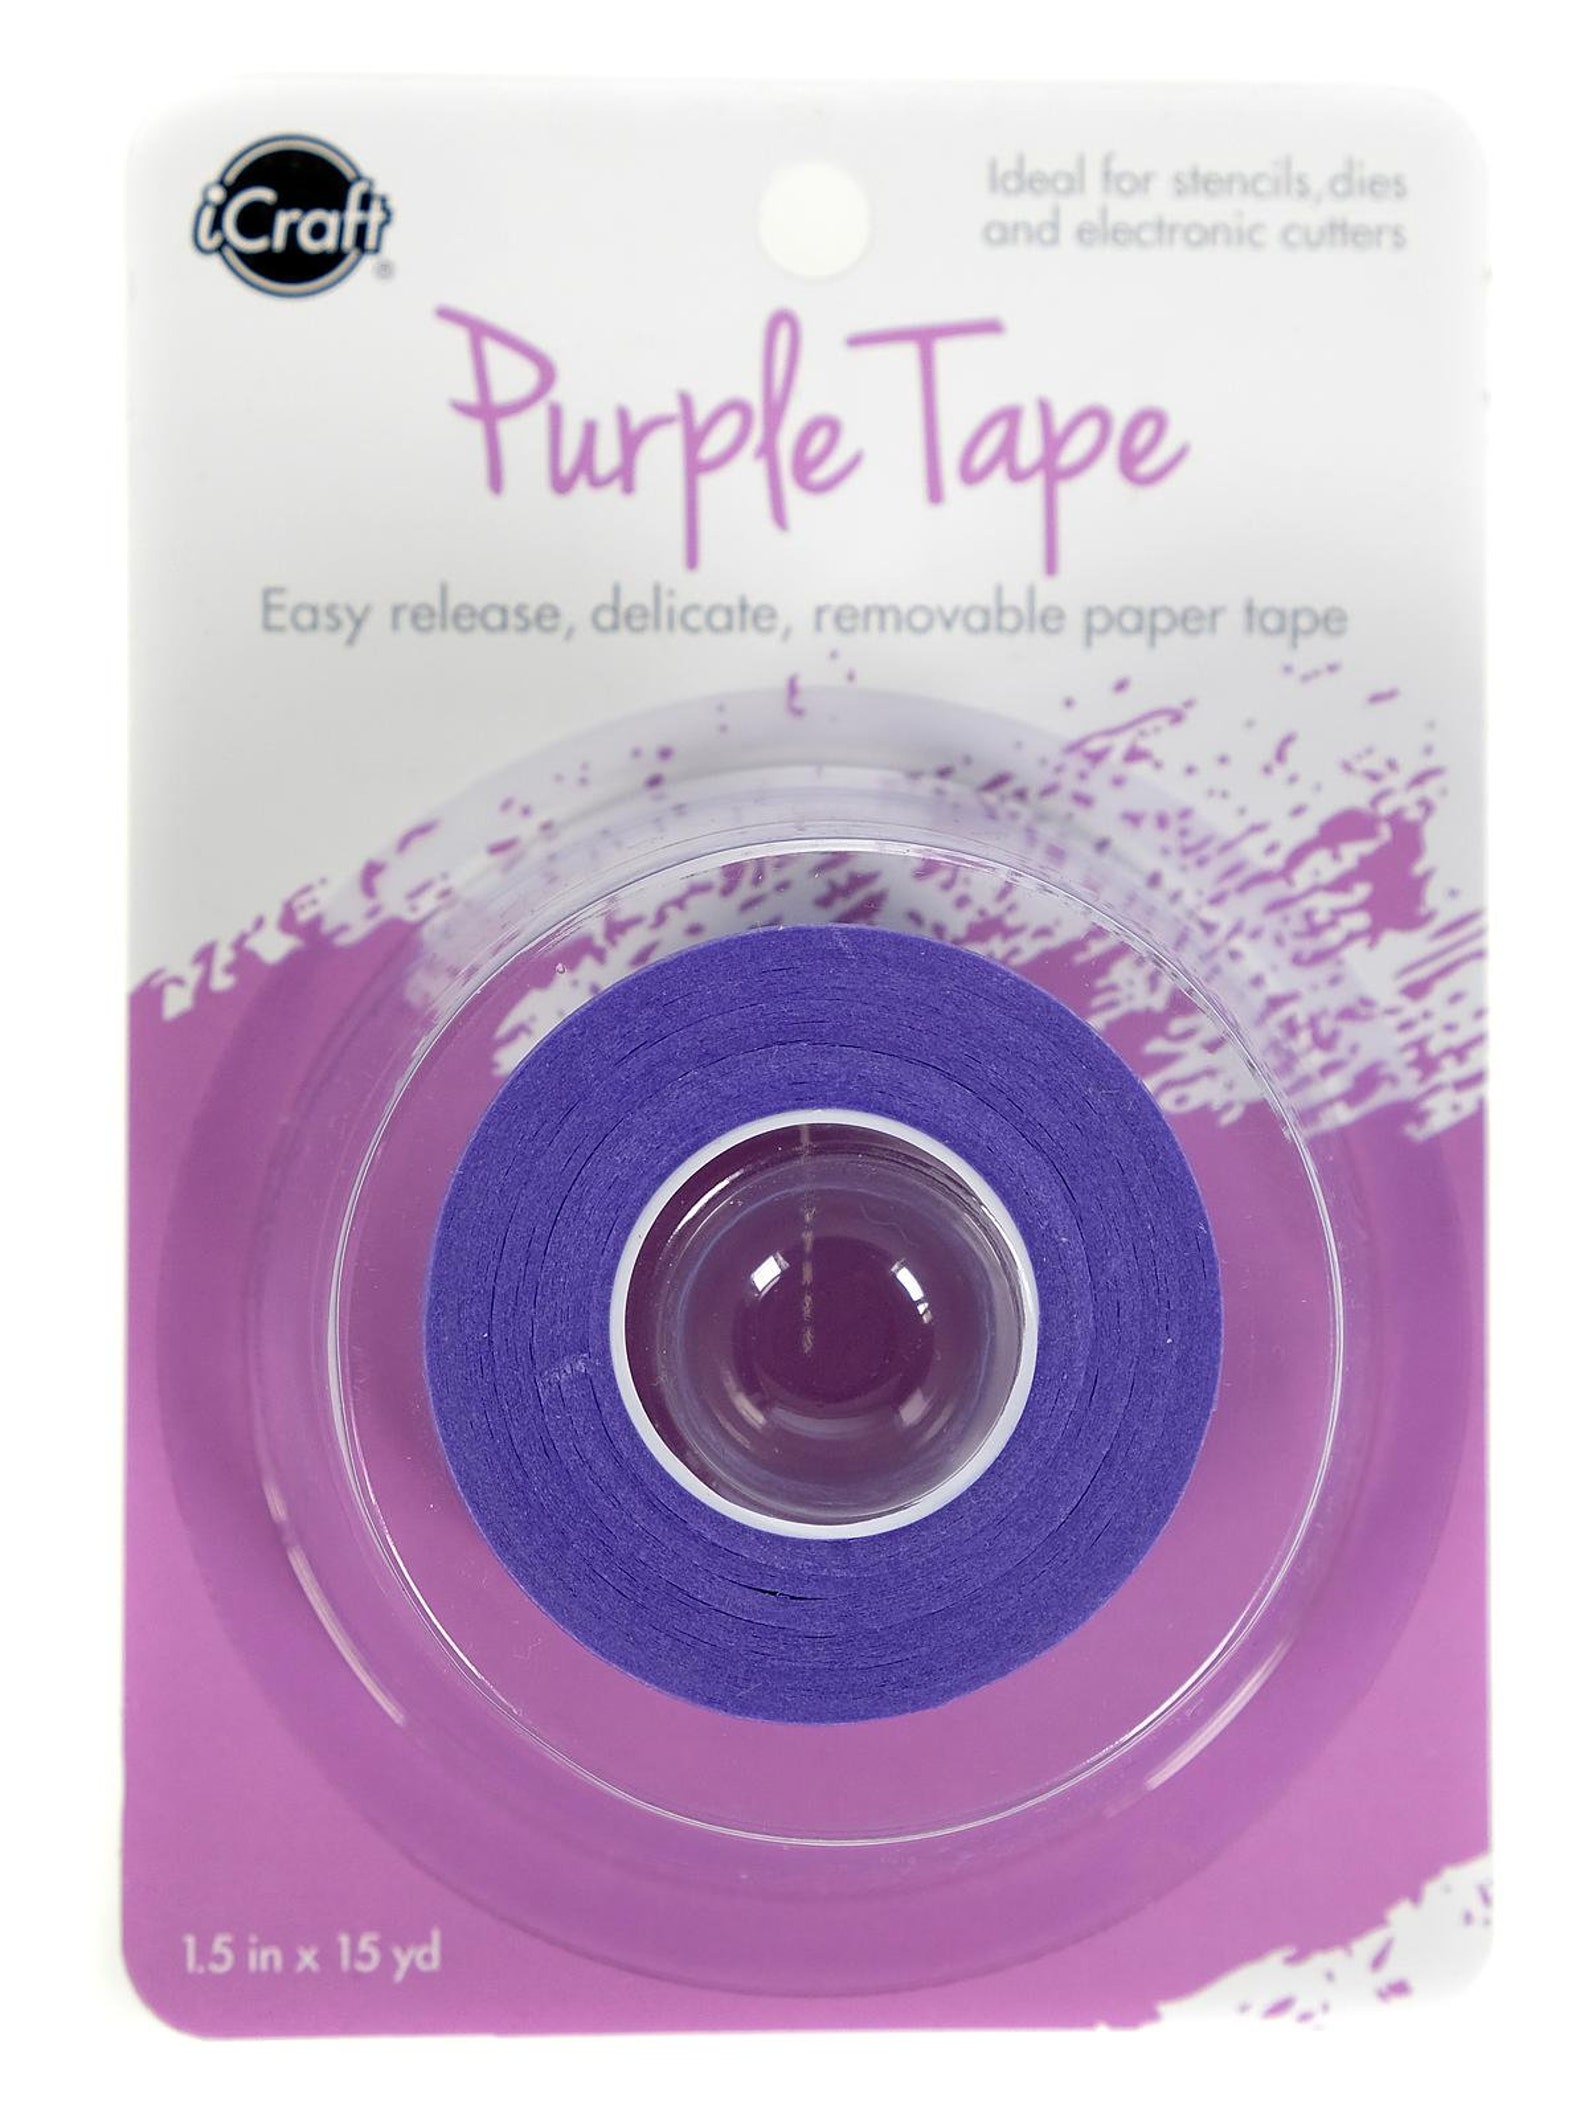 Easy-Release Removable Purple Tape for Paper Crafts by iCraft | Etsy